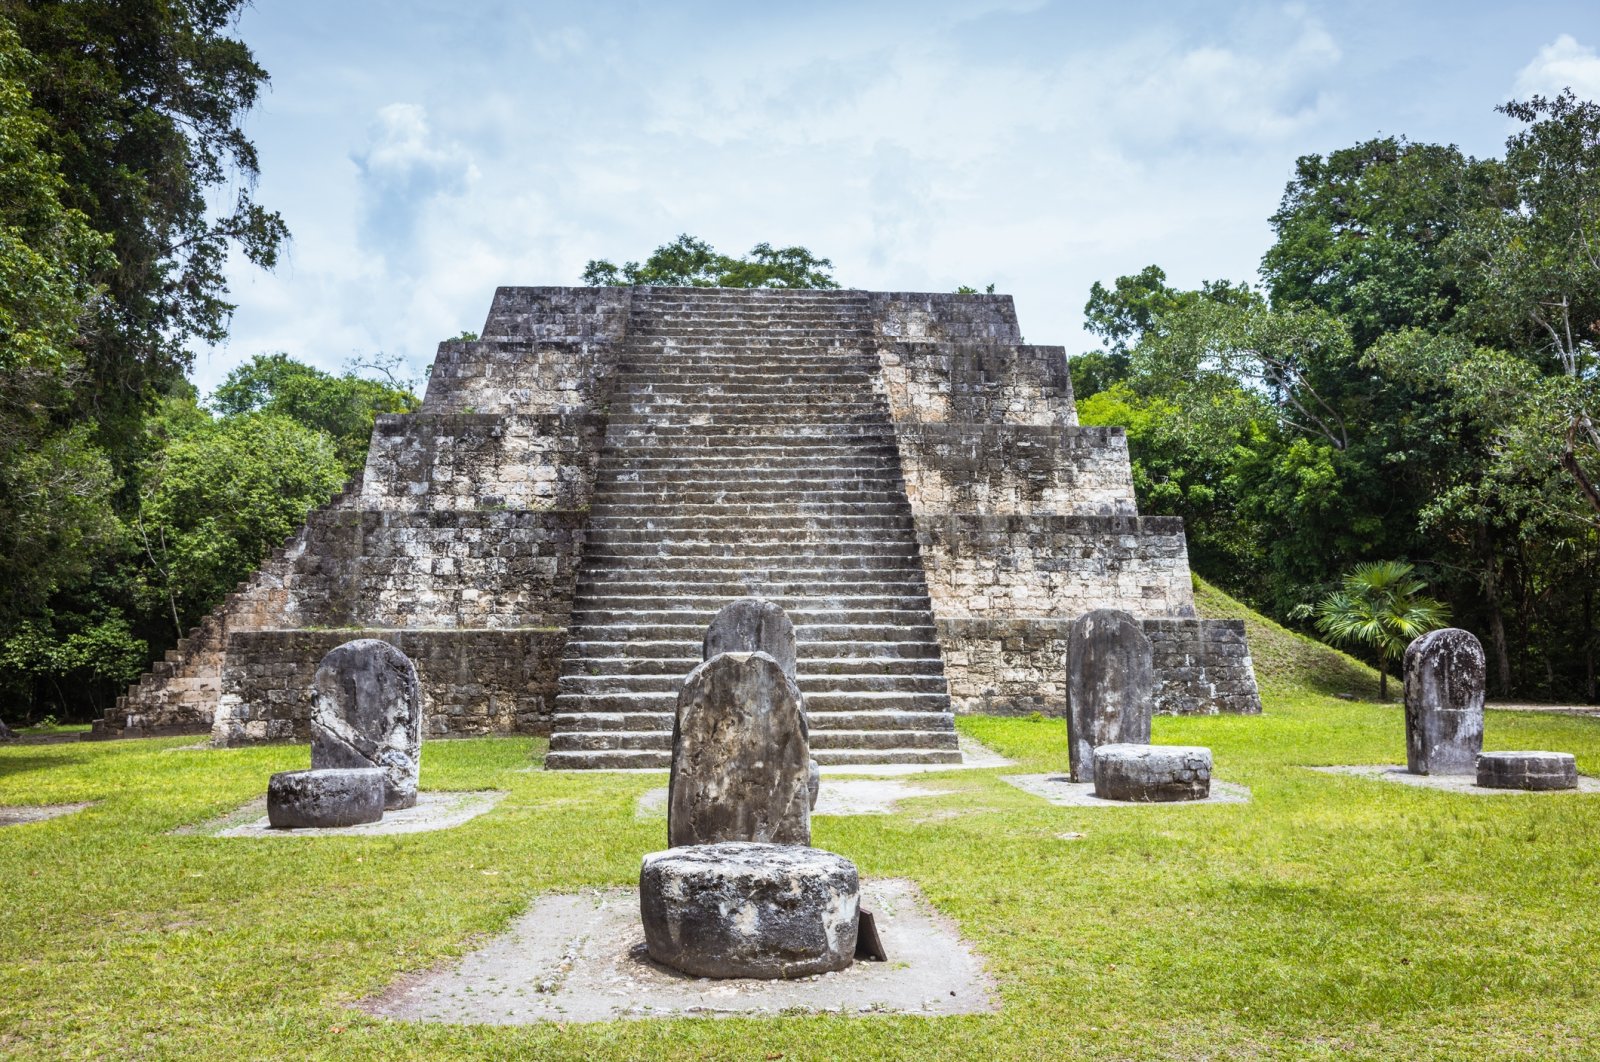 Mayan pyramid and ruins in the famous Tikal National Park, Guatemala. (Getty Images Photo)